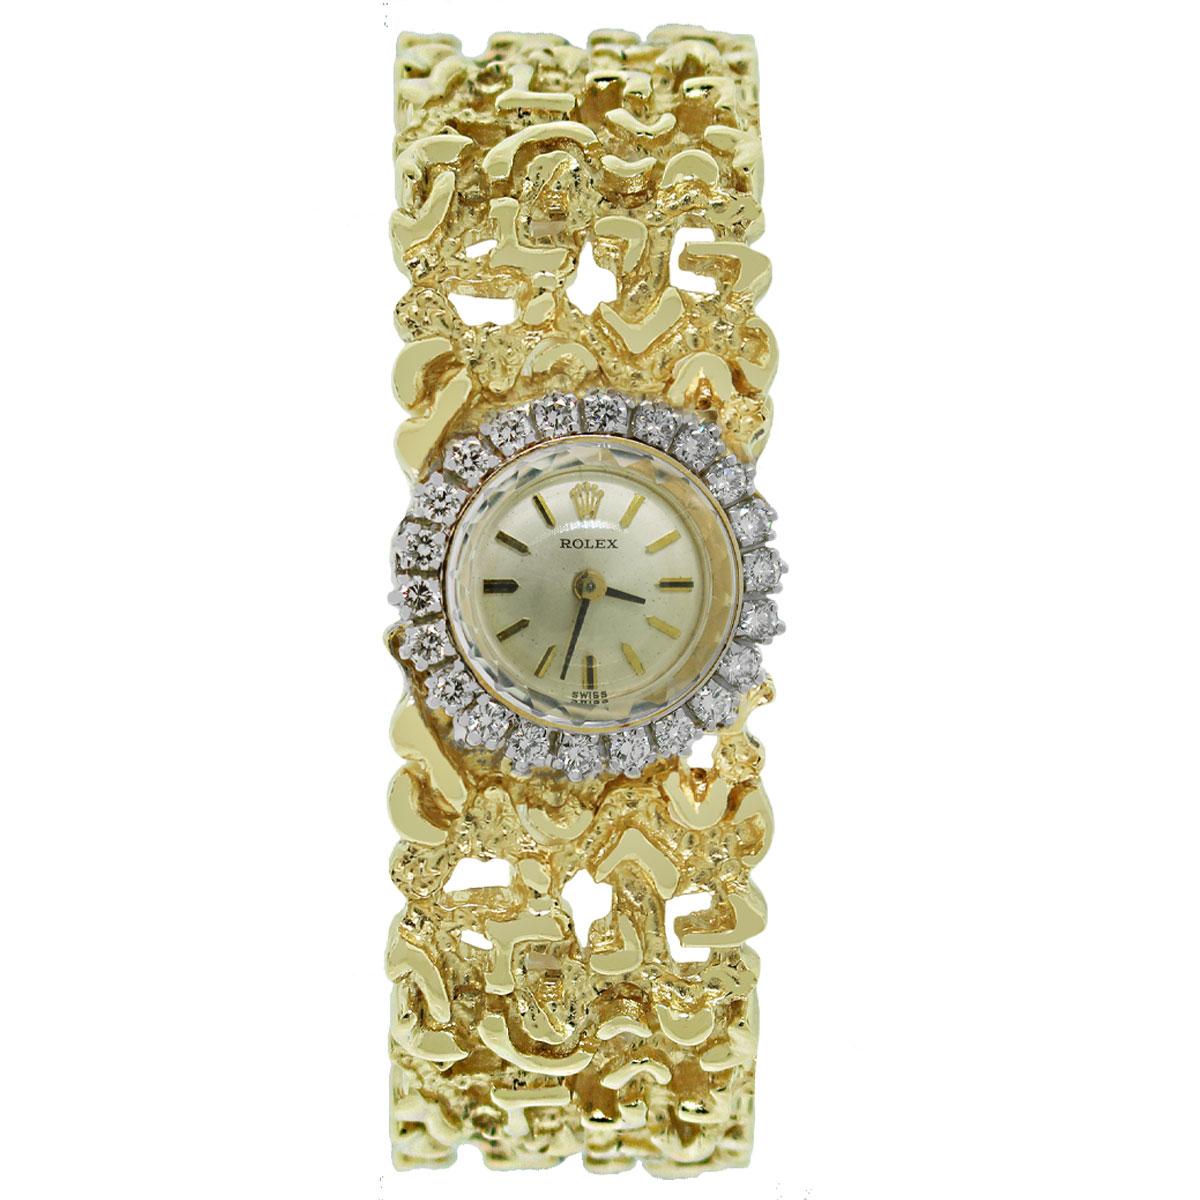 Brand: Rolex
Case Material: 14k Yellow gold
Case Diameter: 20mm
Bezel: 14k Yellow Gold Diamond Bezel
Dial: Gold dial with yellow gold diamond hour markers and hands
Bracelet: 14k yellow gold bracelet
Size: Fits up to a 6.5